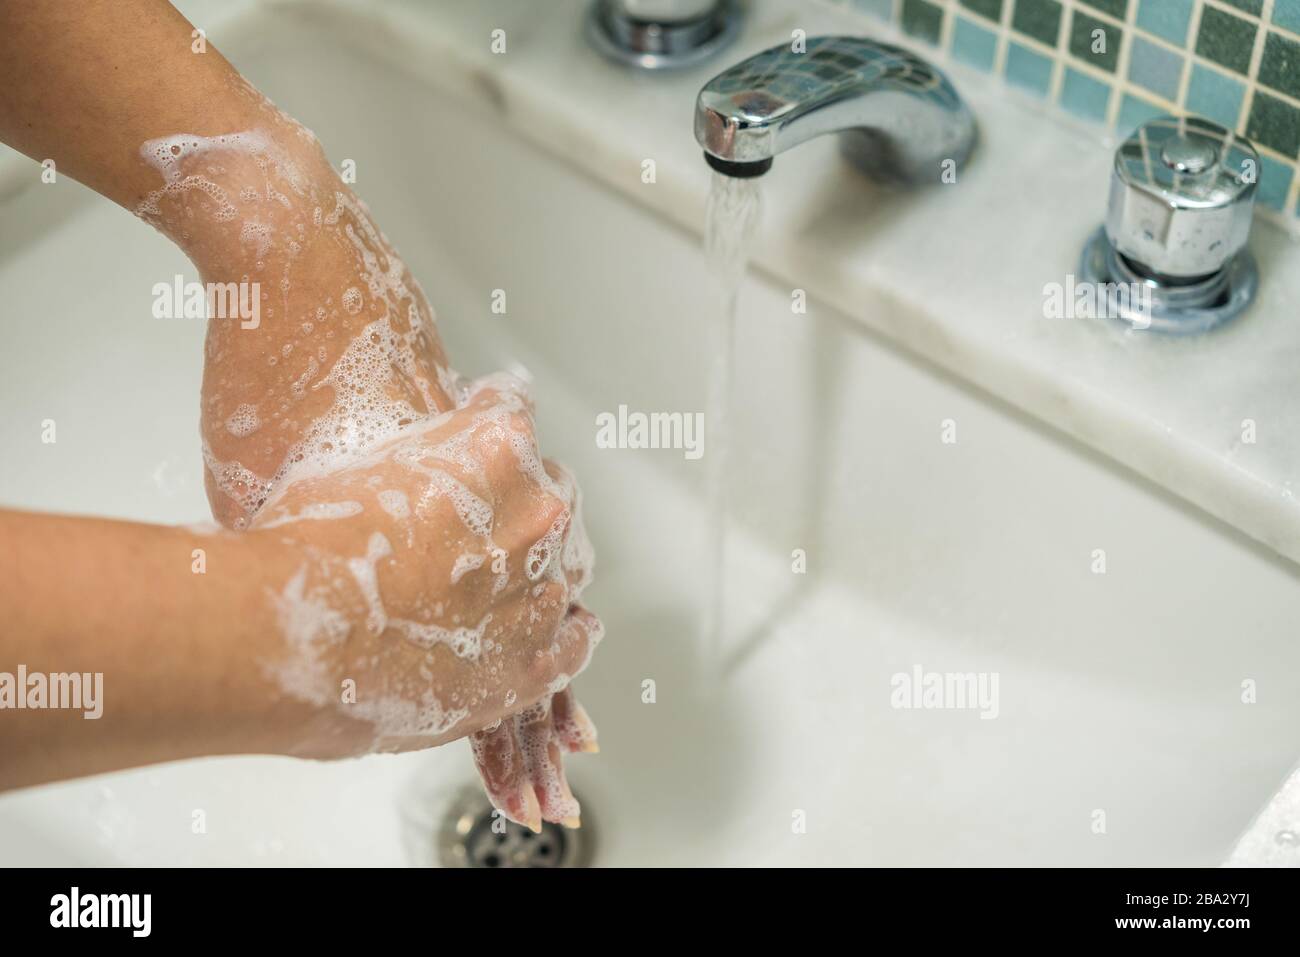 Washing hands with disinfectant soap for prevention of coronavirus. Stock Photo